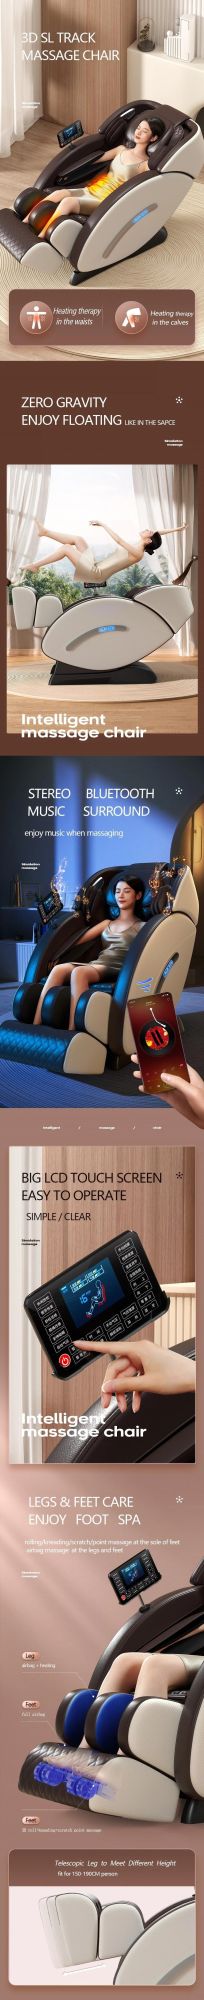 Sauron T100 New Product 3D Luxury Massager Chair Long SL Track Full Body Massage Chairs Cheap Price